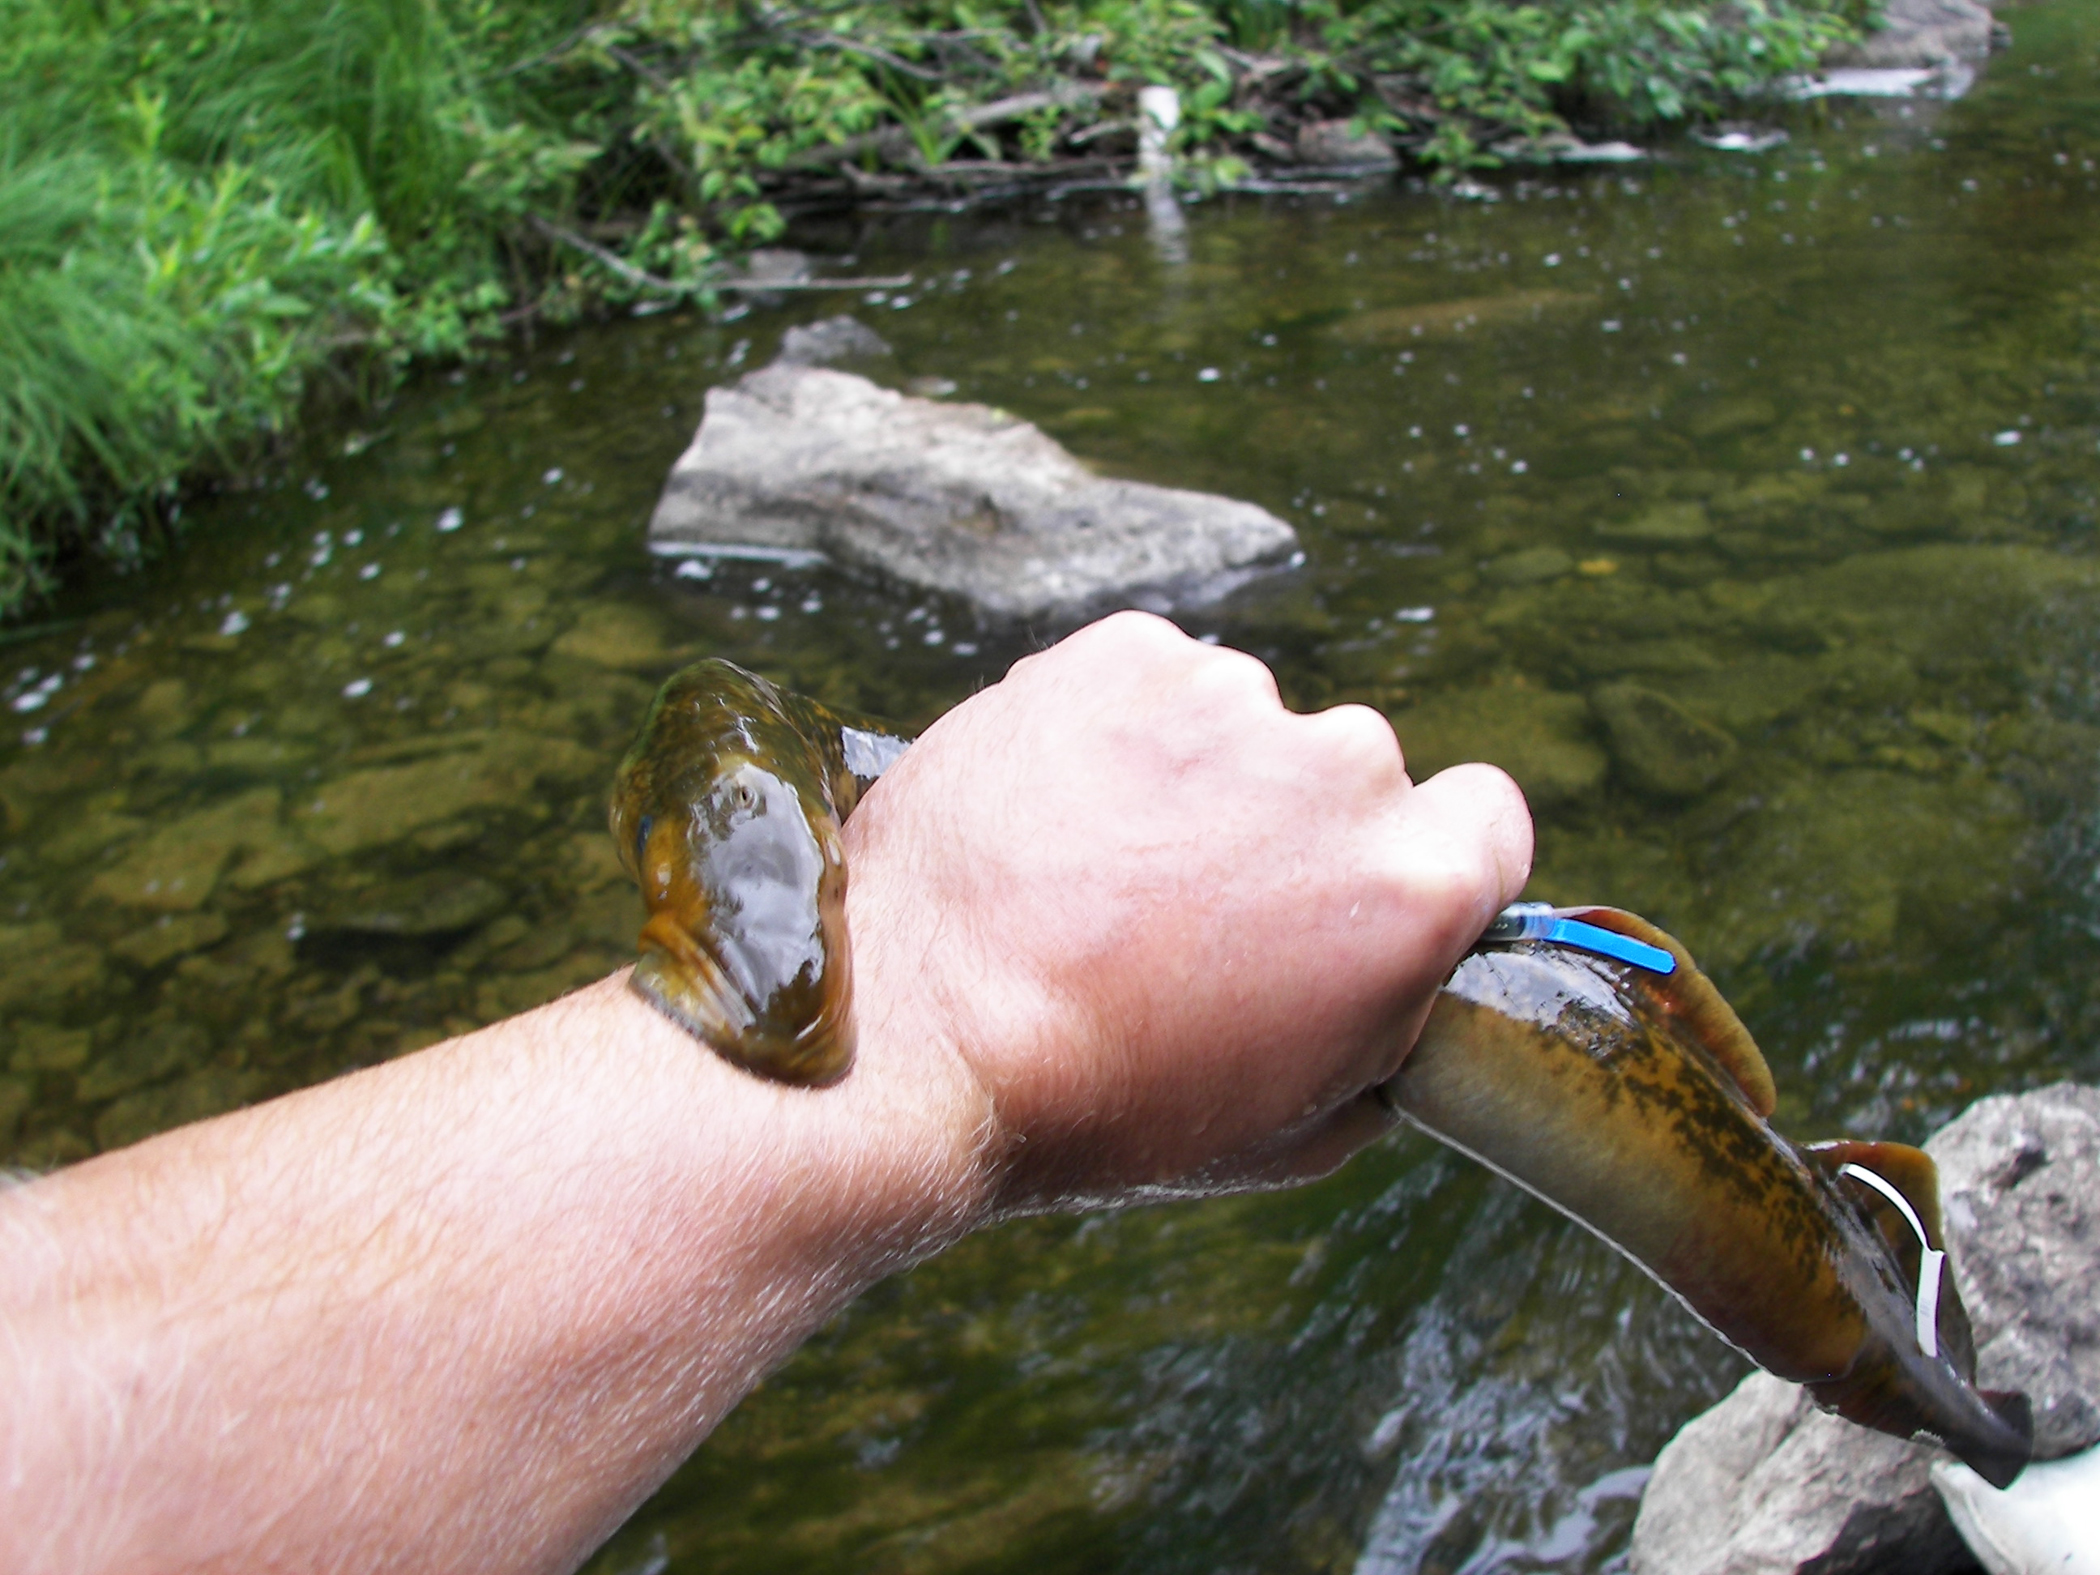 Genetic mapping of sea lamprey may control invader and improve human health  | Great Lakes Echo